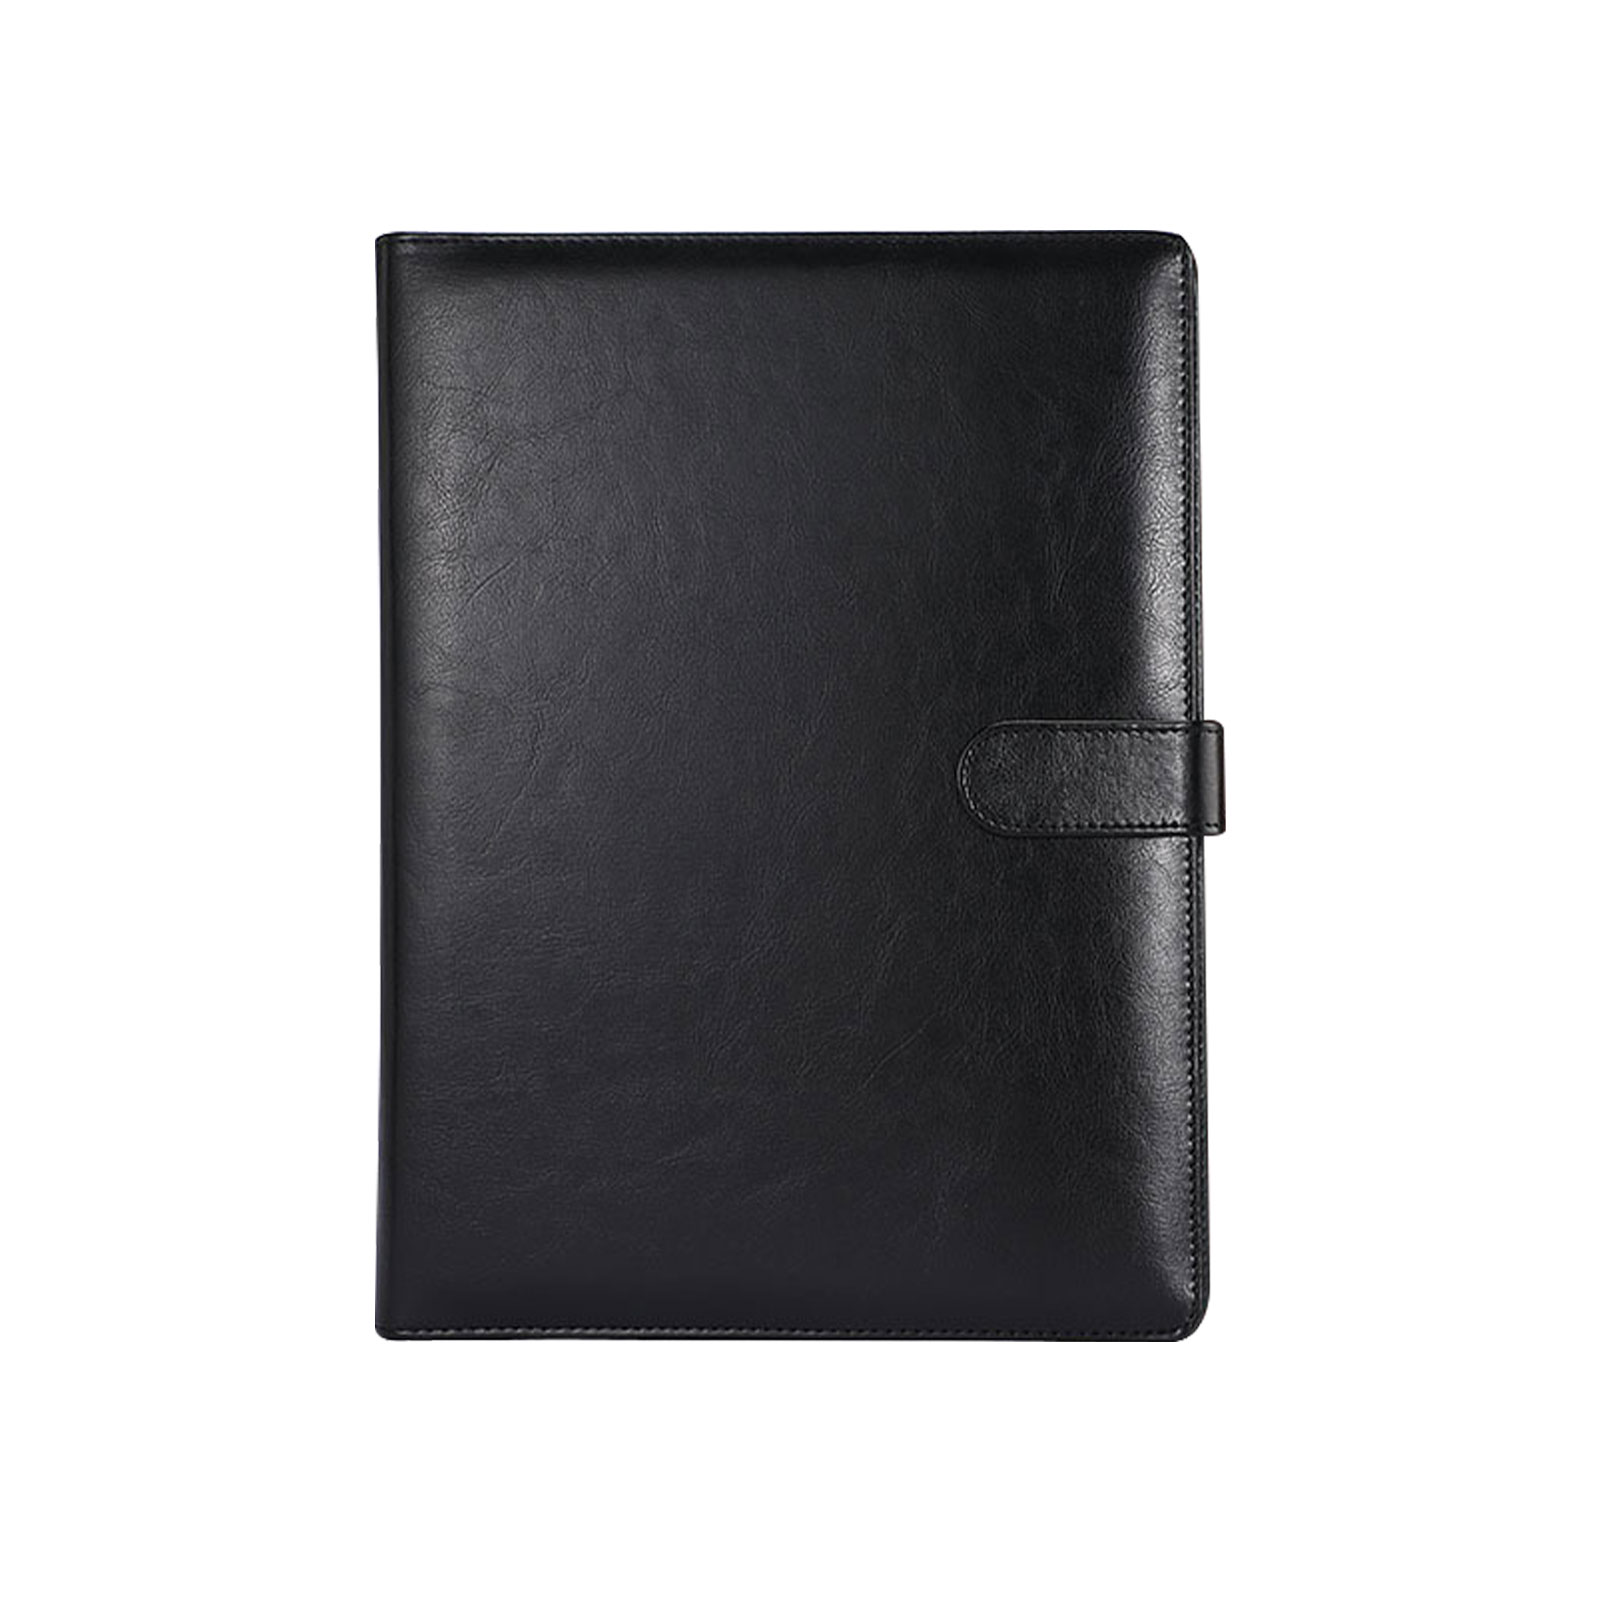 Padfolio Organizer PU Leather Magnetic Buckle For Document Adults Meeting Card Holder Clip Portable Durable Business Practical